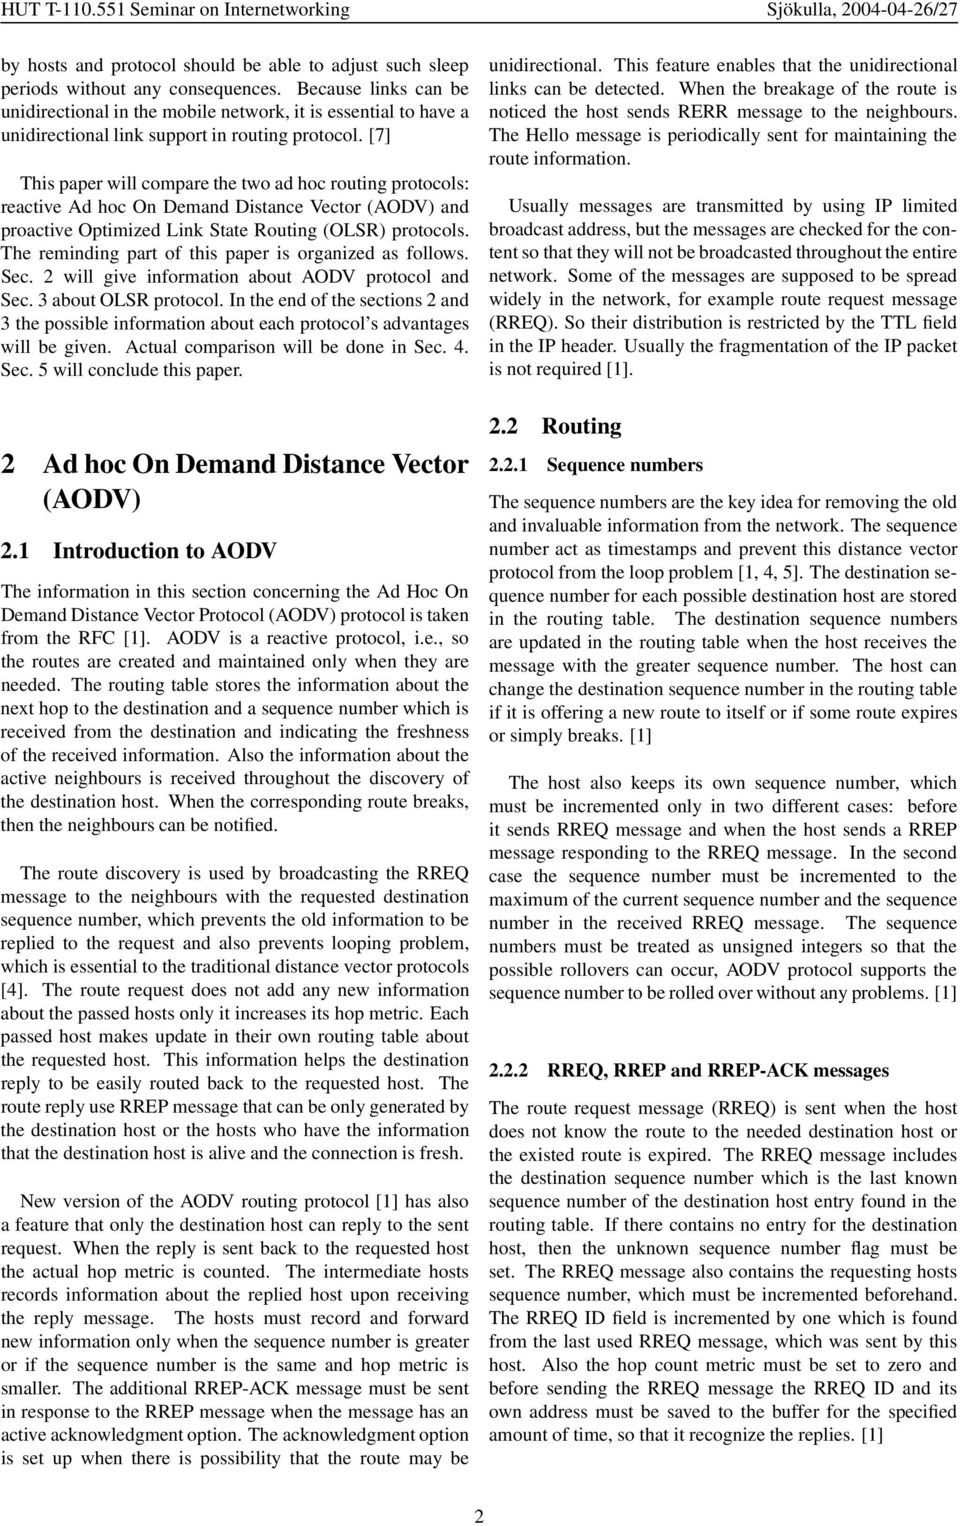 [7] This paper will compare the two ad hoc routing protocols: reactive Ad hoc On Demand Distance Vector (AODV) and proactive Optimized Link State Routing (OLSR) protocols.